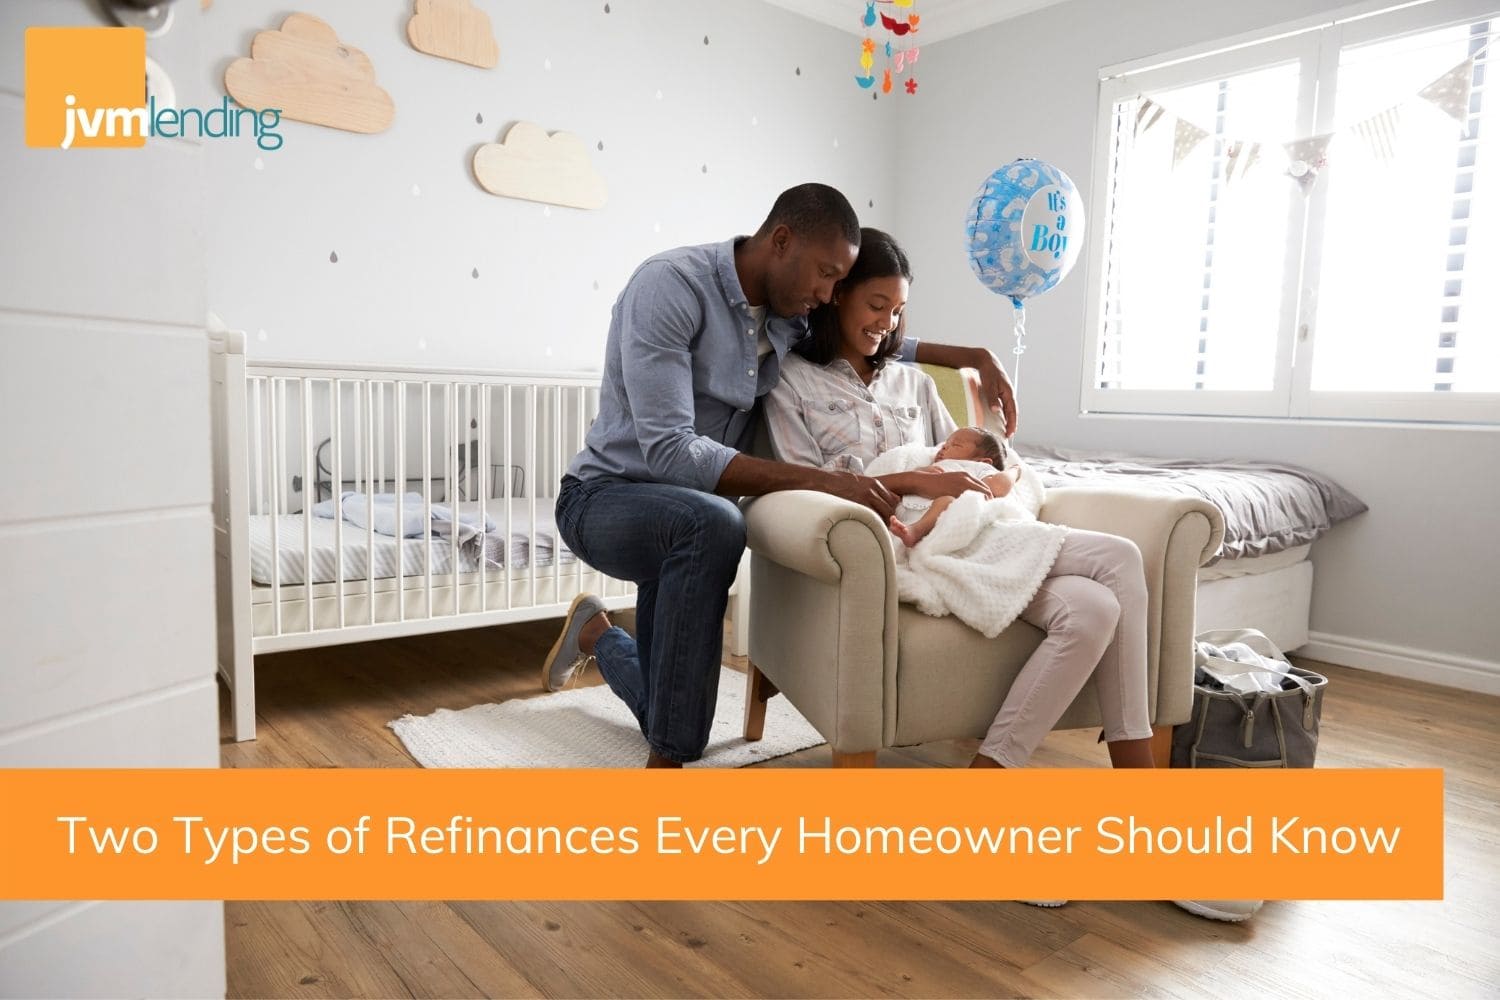 A young black couple sits in a nursery at home with a newborn baby. Refinancing provides homeowners with options to expand their family and their home with their saved funds.